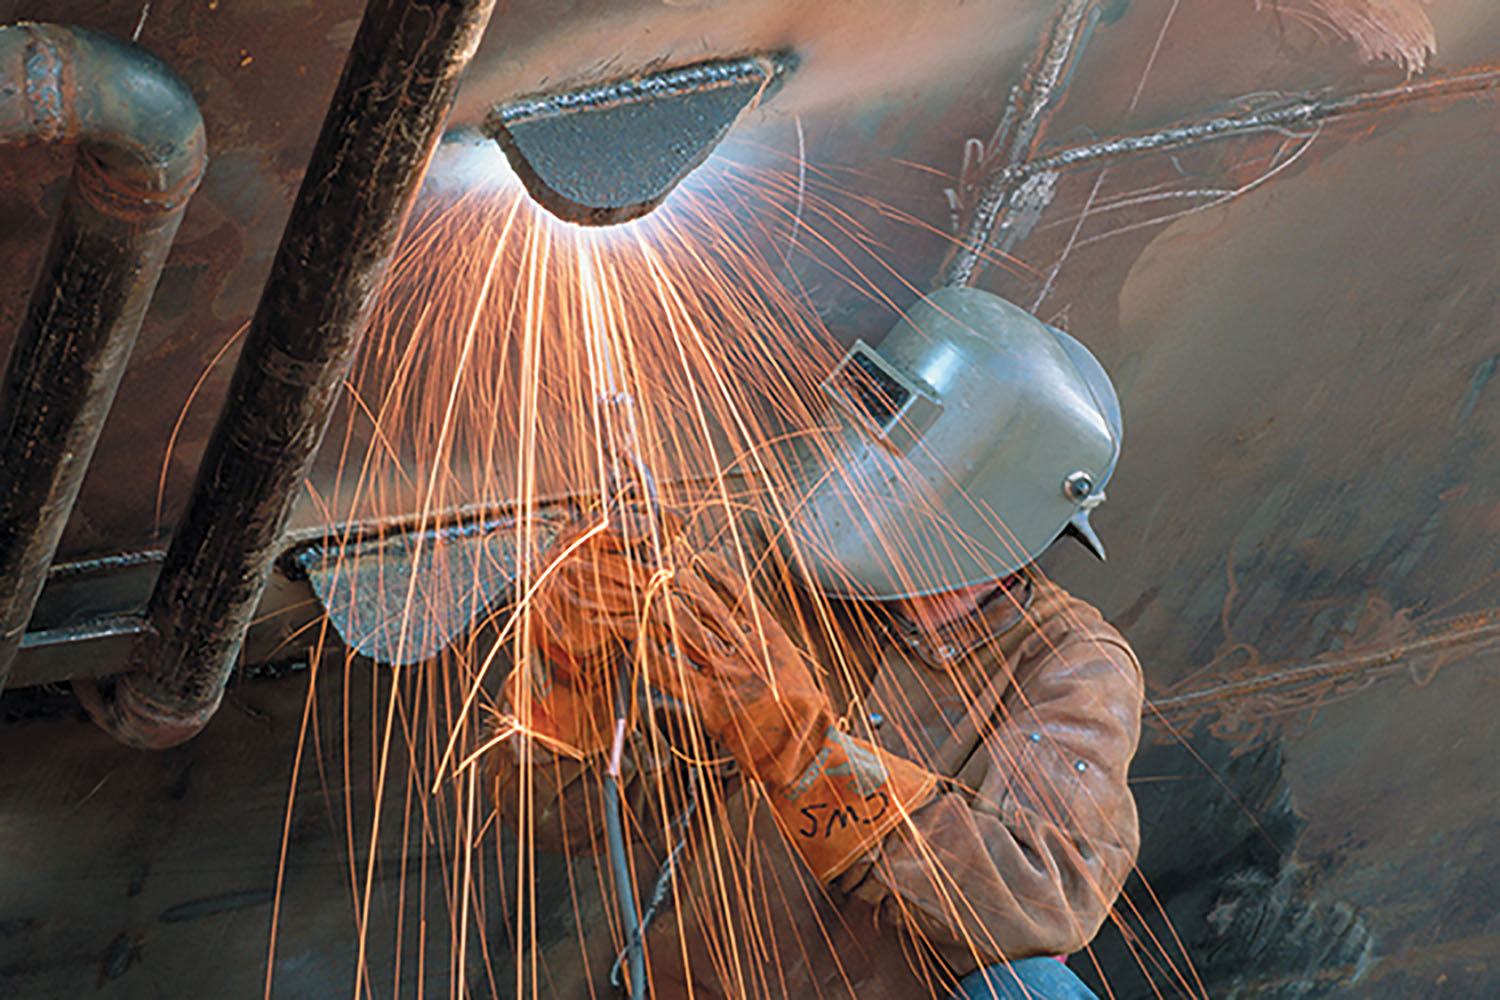 One of Tradesmen International’s craftworkers welds on the hull of a vessel at a shipyard.